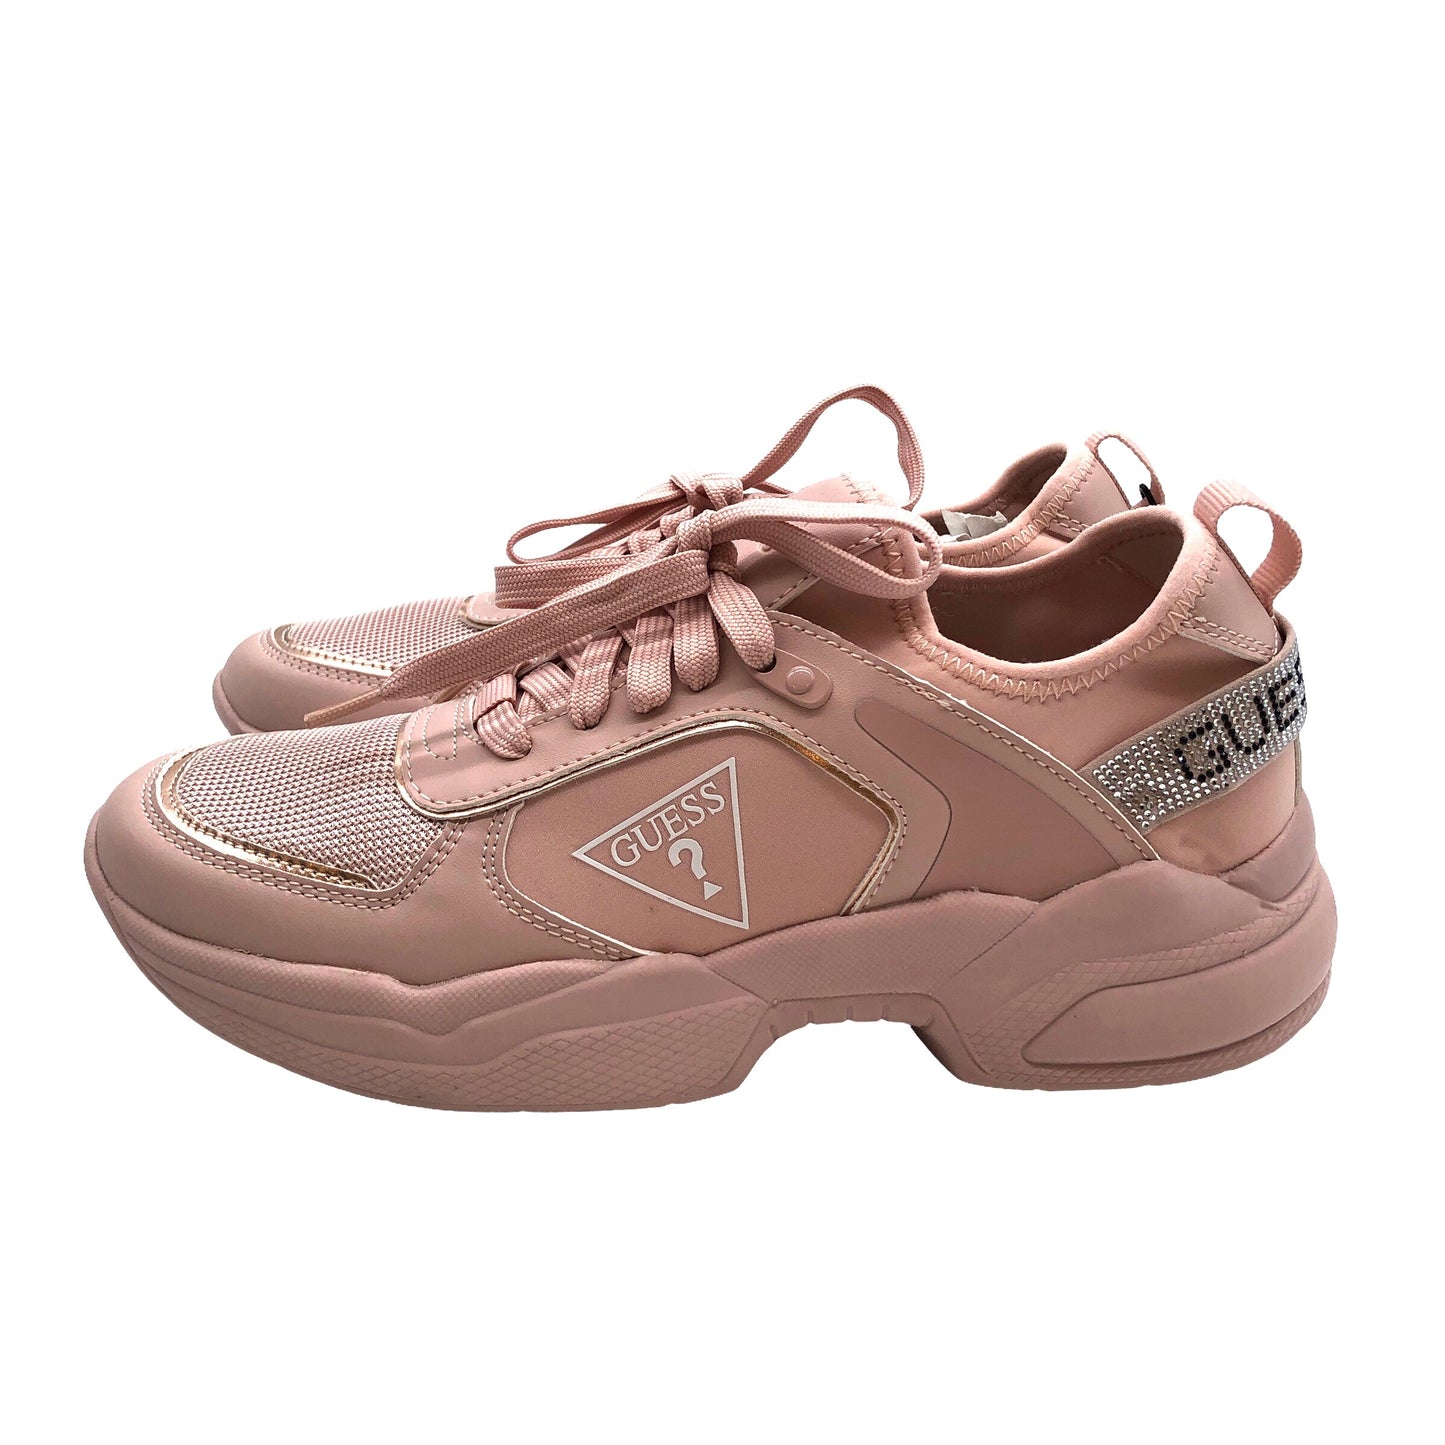 Pink Shoes Sneakers Guess, Size 9